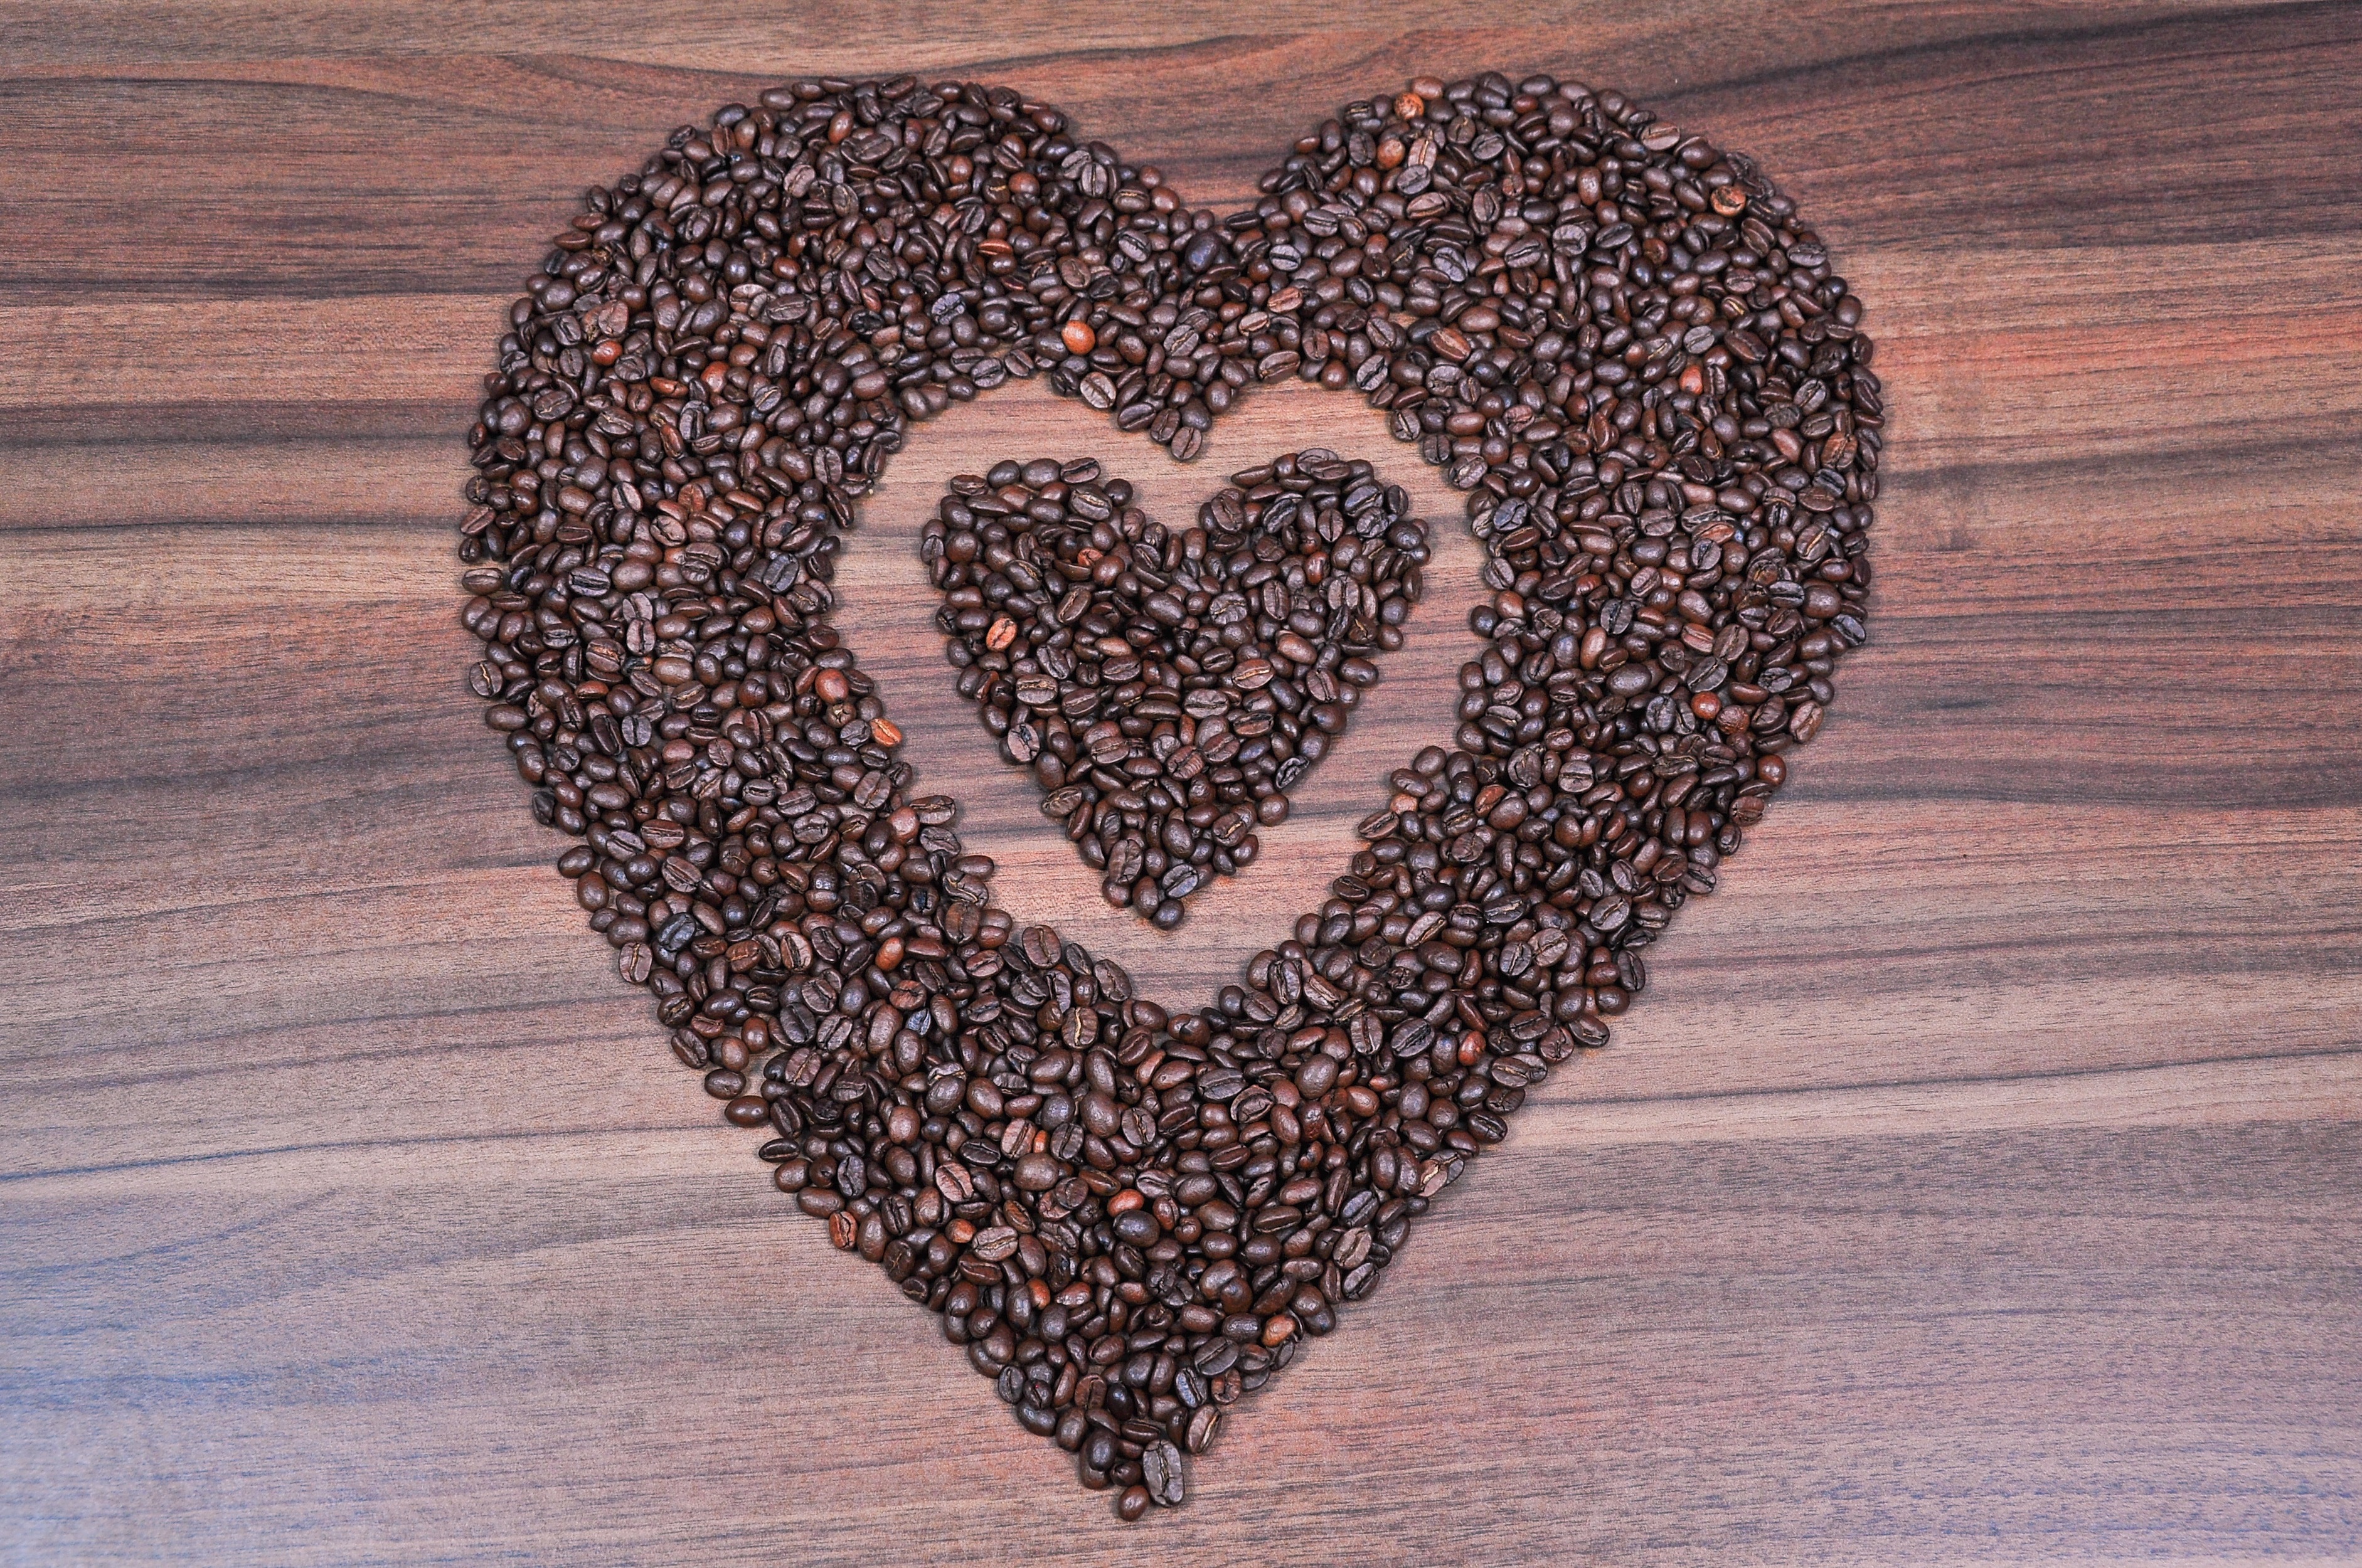 Placing coffee beans heart-shaped pattern Stock Photo